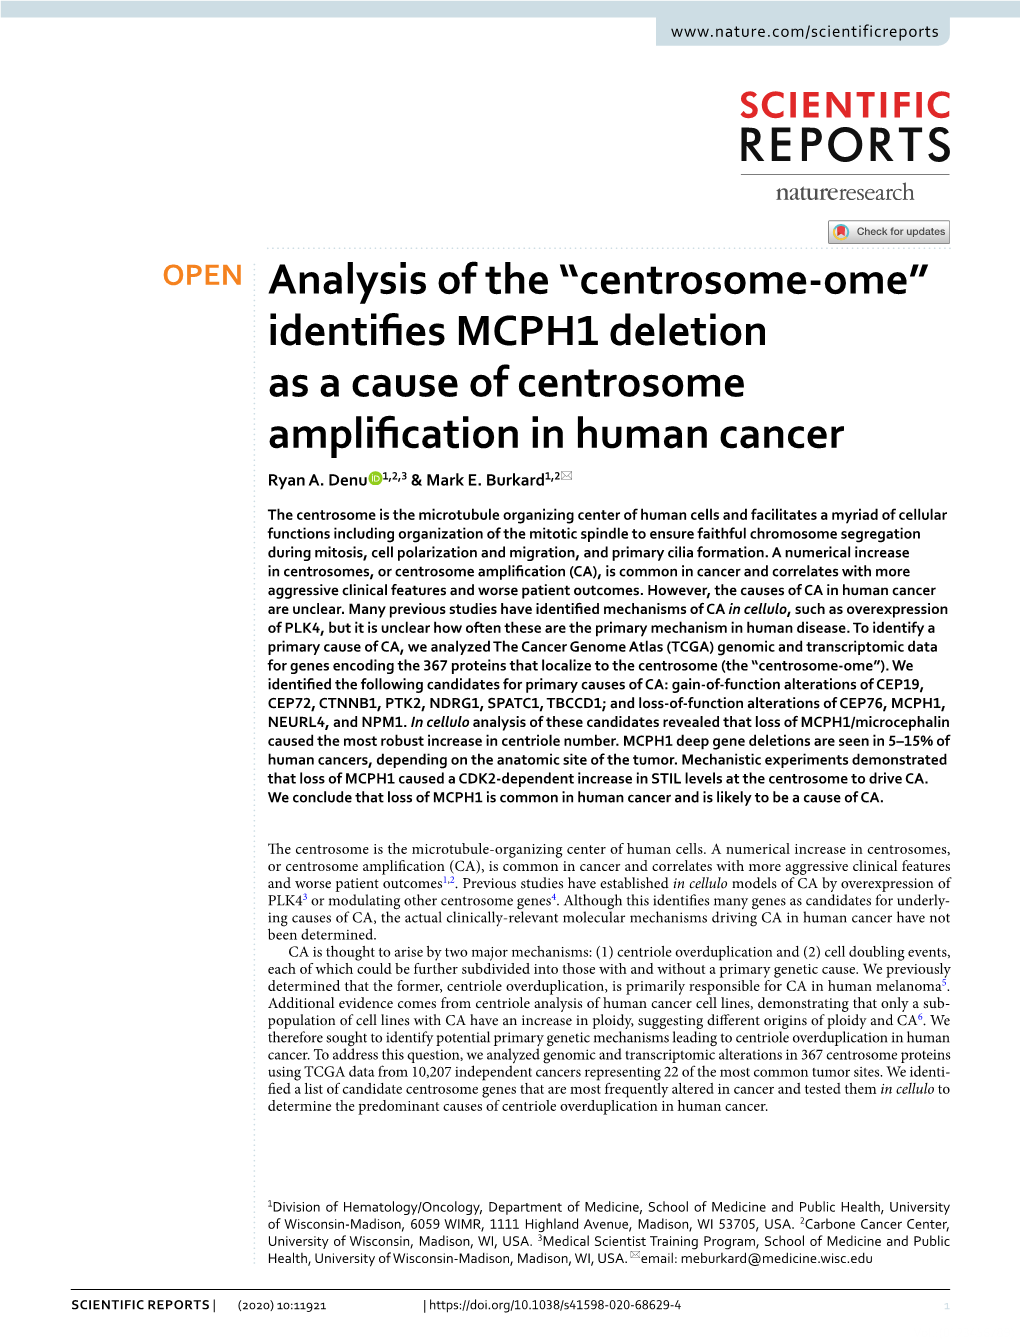 Identifies MCPH1 Deletion As a Cause of Centrosome Amplification in Human Cancer